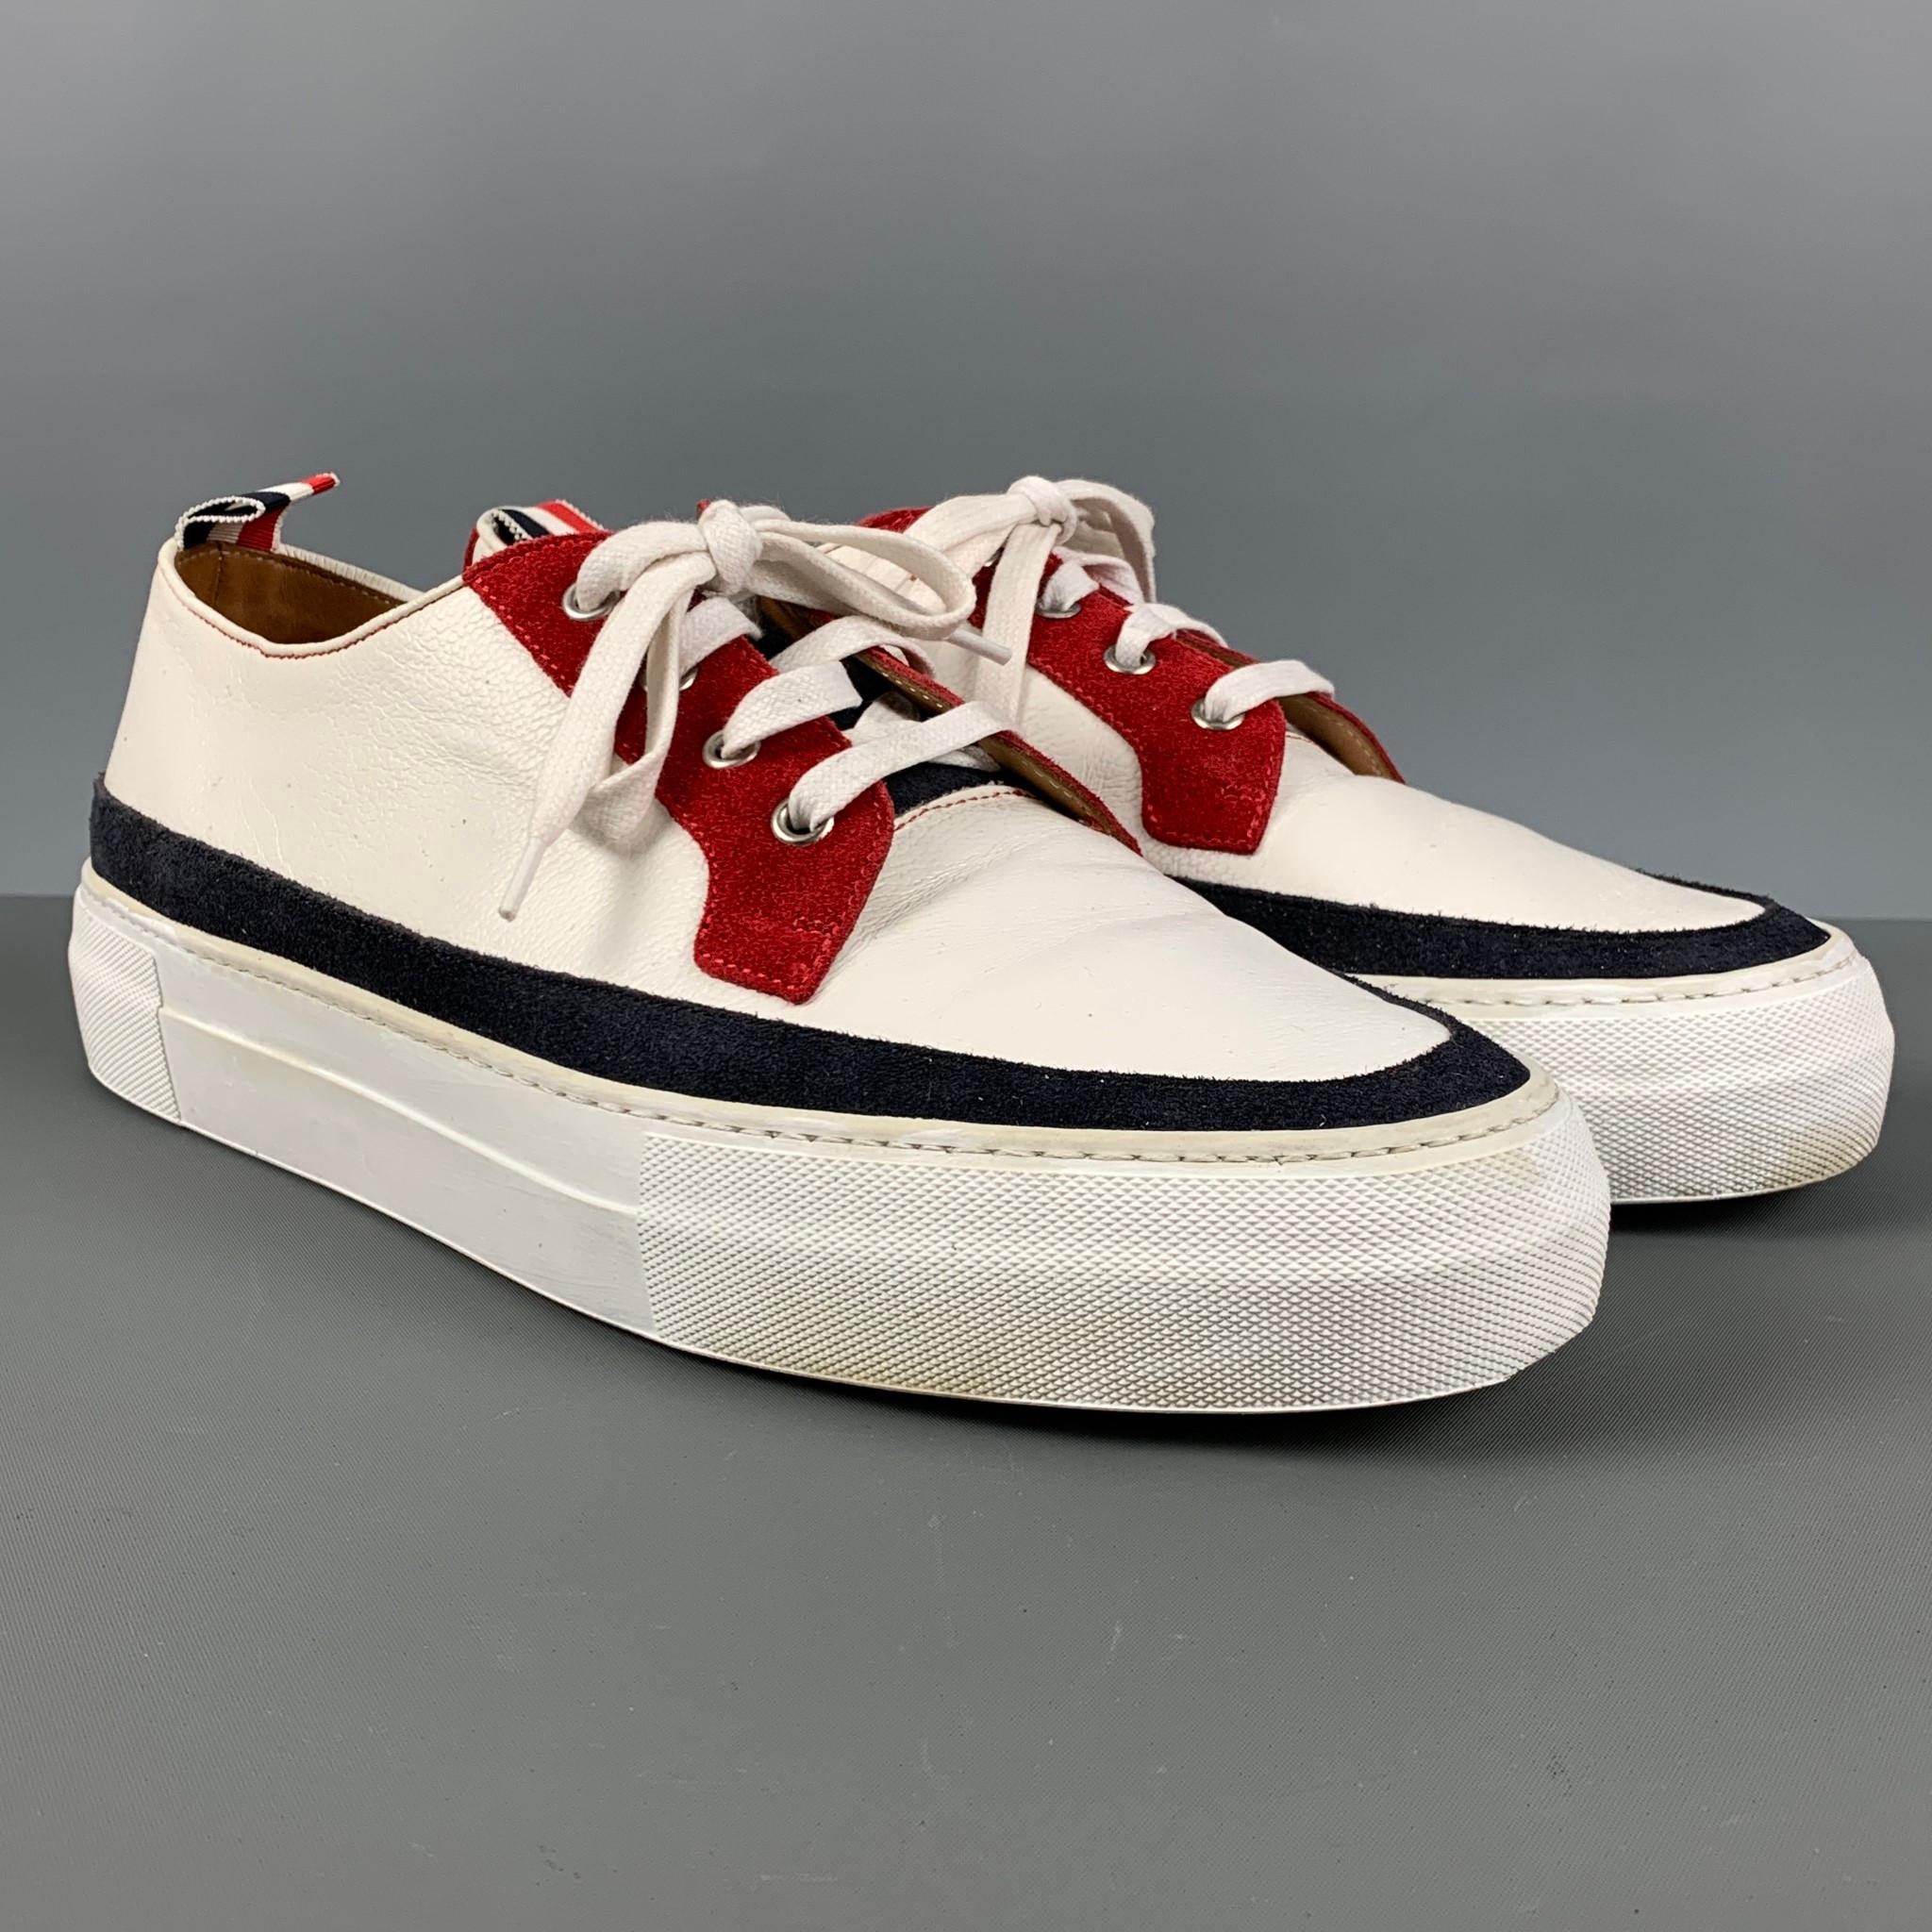 THOM BROWNE sneakers comes in a white leather featuring a navy and red suede details, low-top style, platform soles, and a lace up closure. Made in Italy.

Very Good Pre-Owned Condition.
Marked: 10

Outsole: 12.5 in. x 4.25 in.  

SKU: